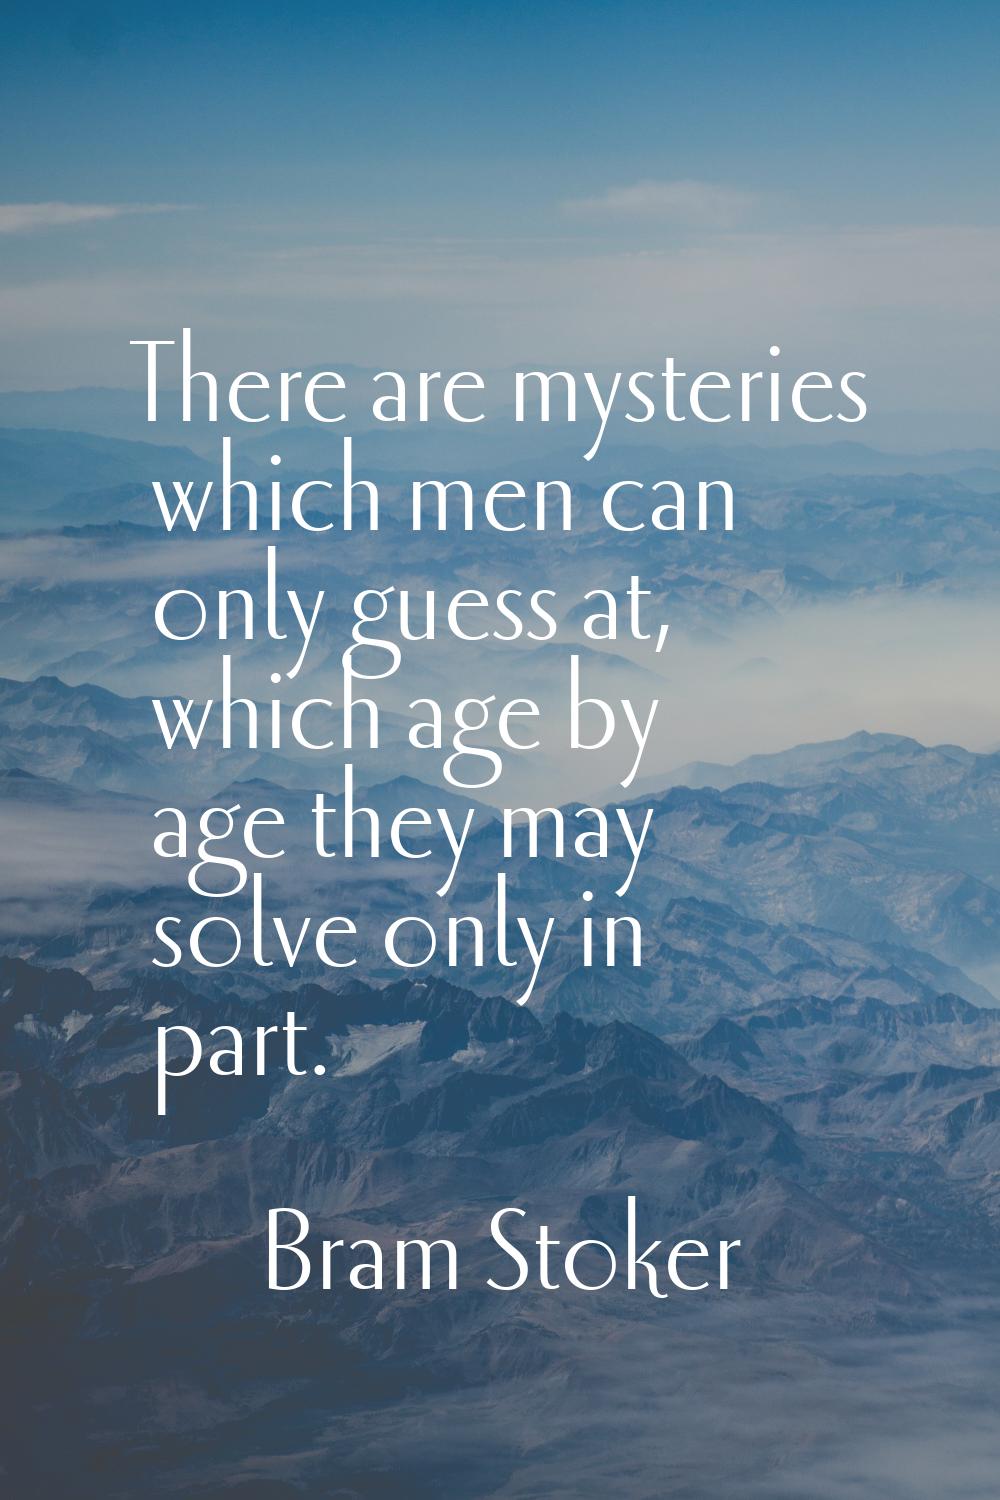 There are mysteries which men can only guess at, which age by age they may solve only in part.